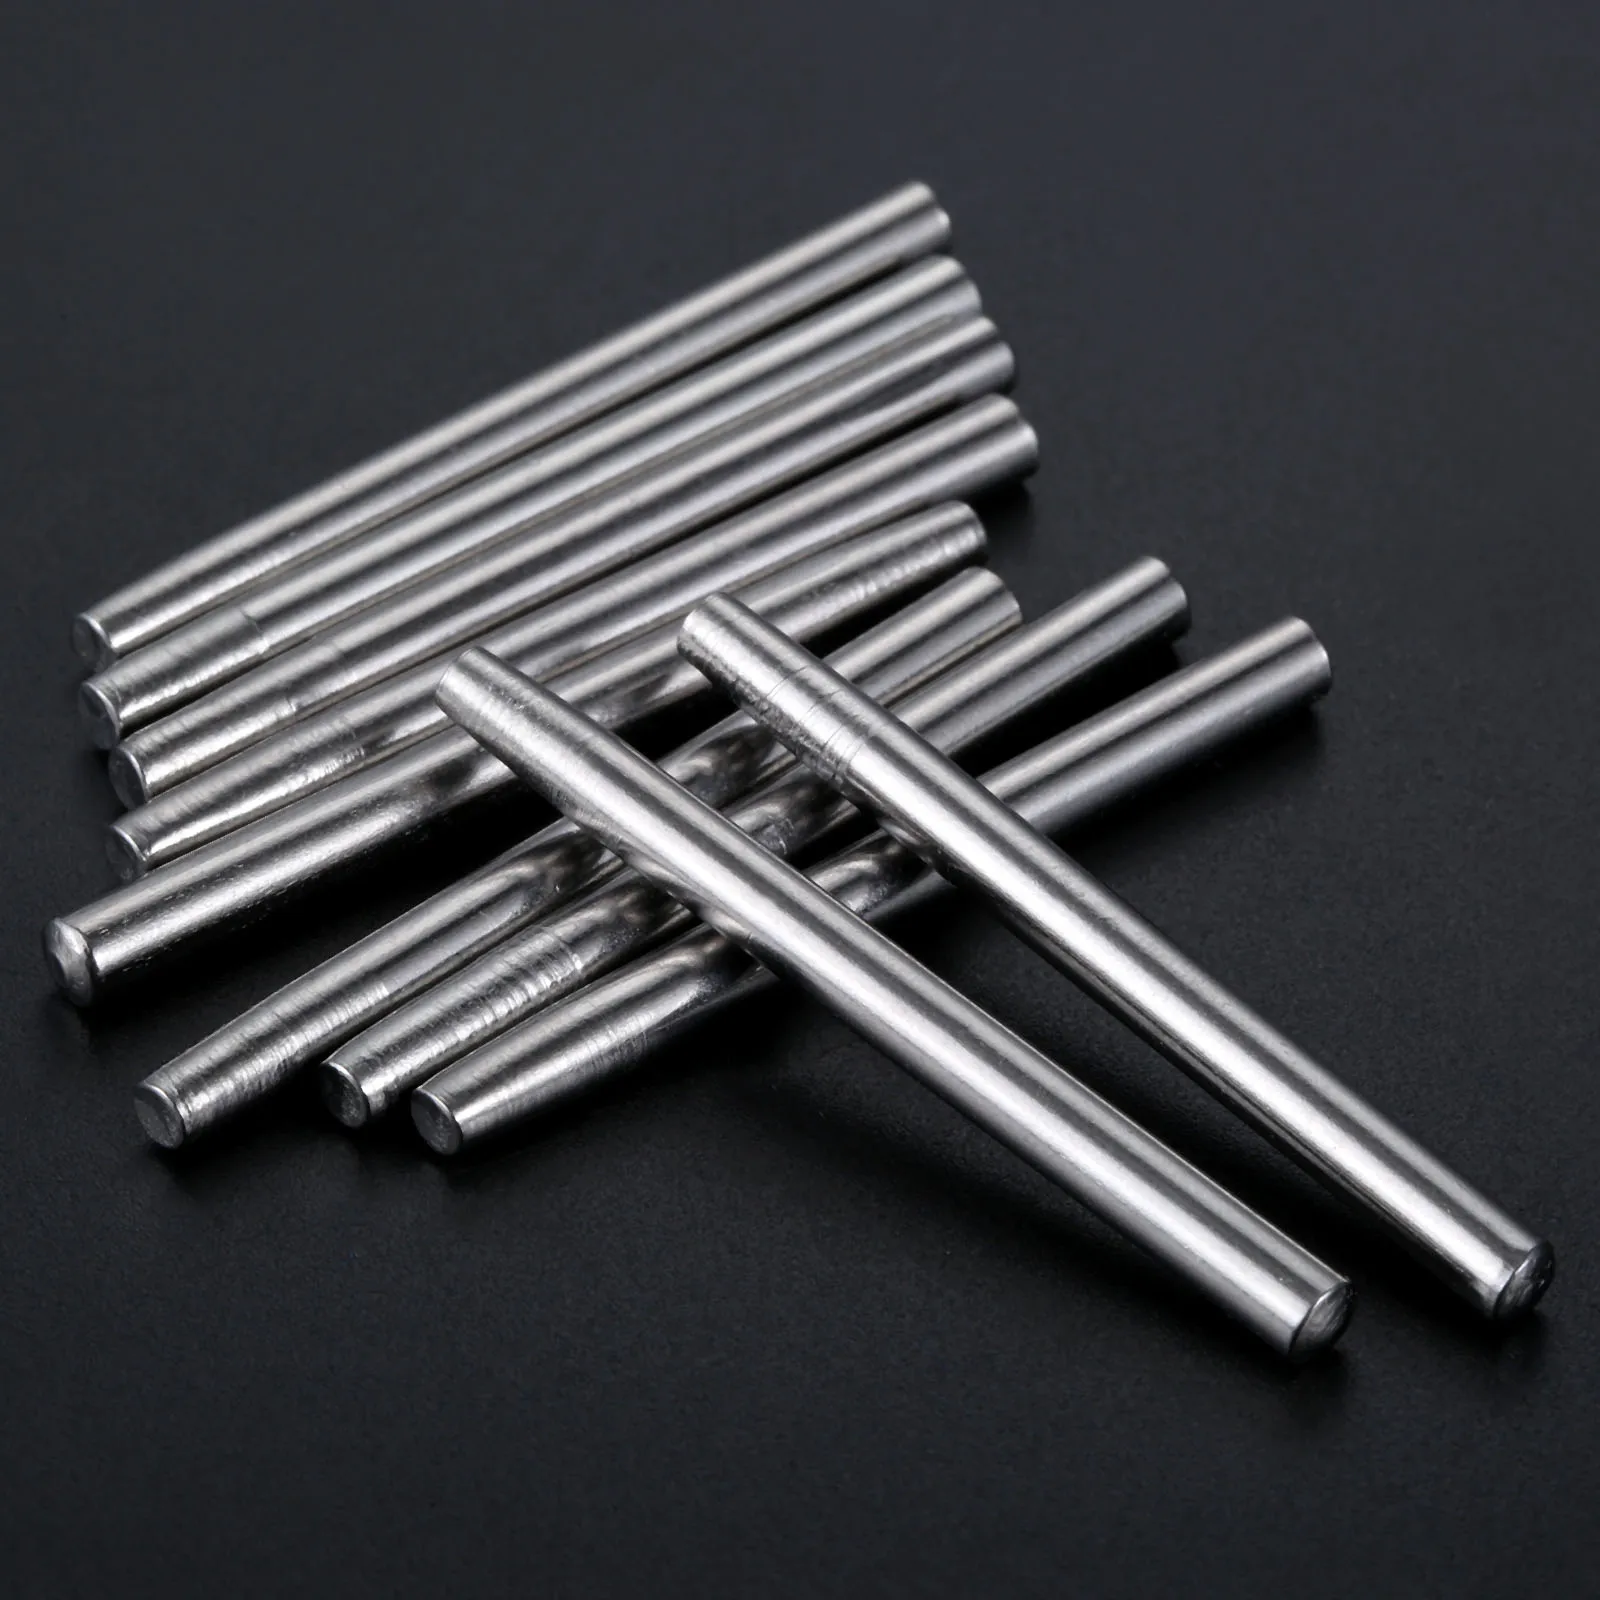 10pcs/kit Sewing Machine Spool Pins Metal Part 46*4mm fits Domestic Sewing Machine fits for Singer Models 1200-1 127 15-30 15CL images - 6